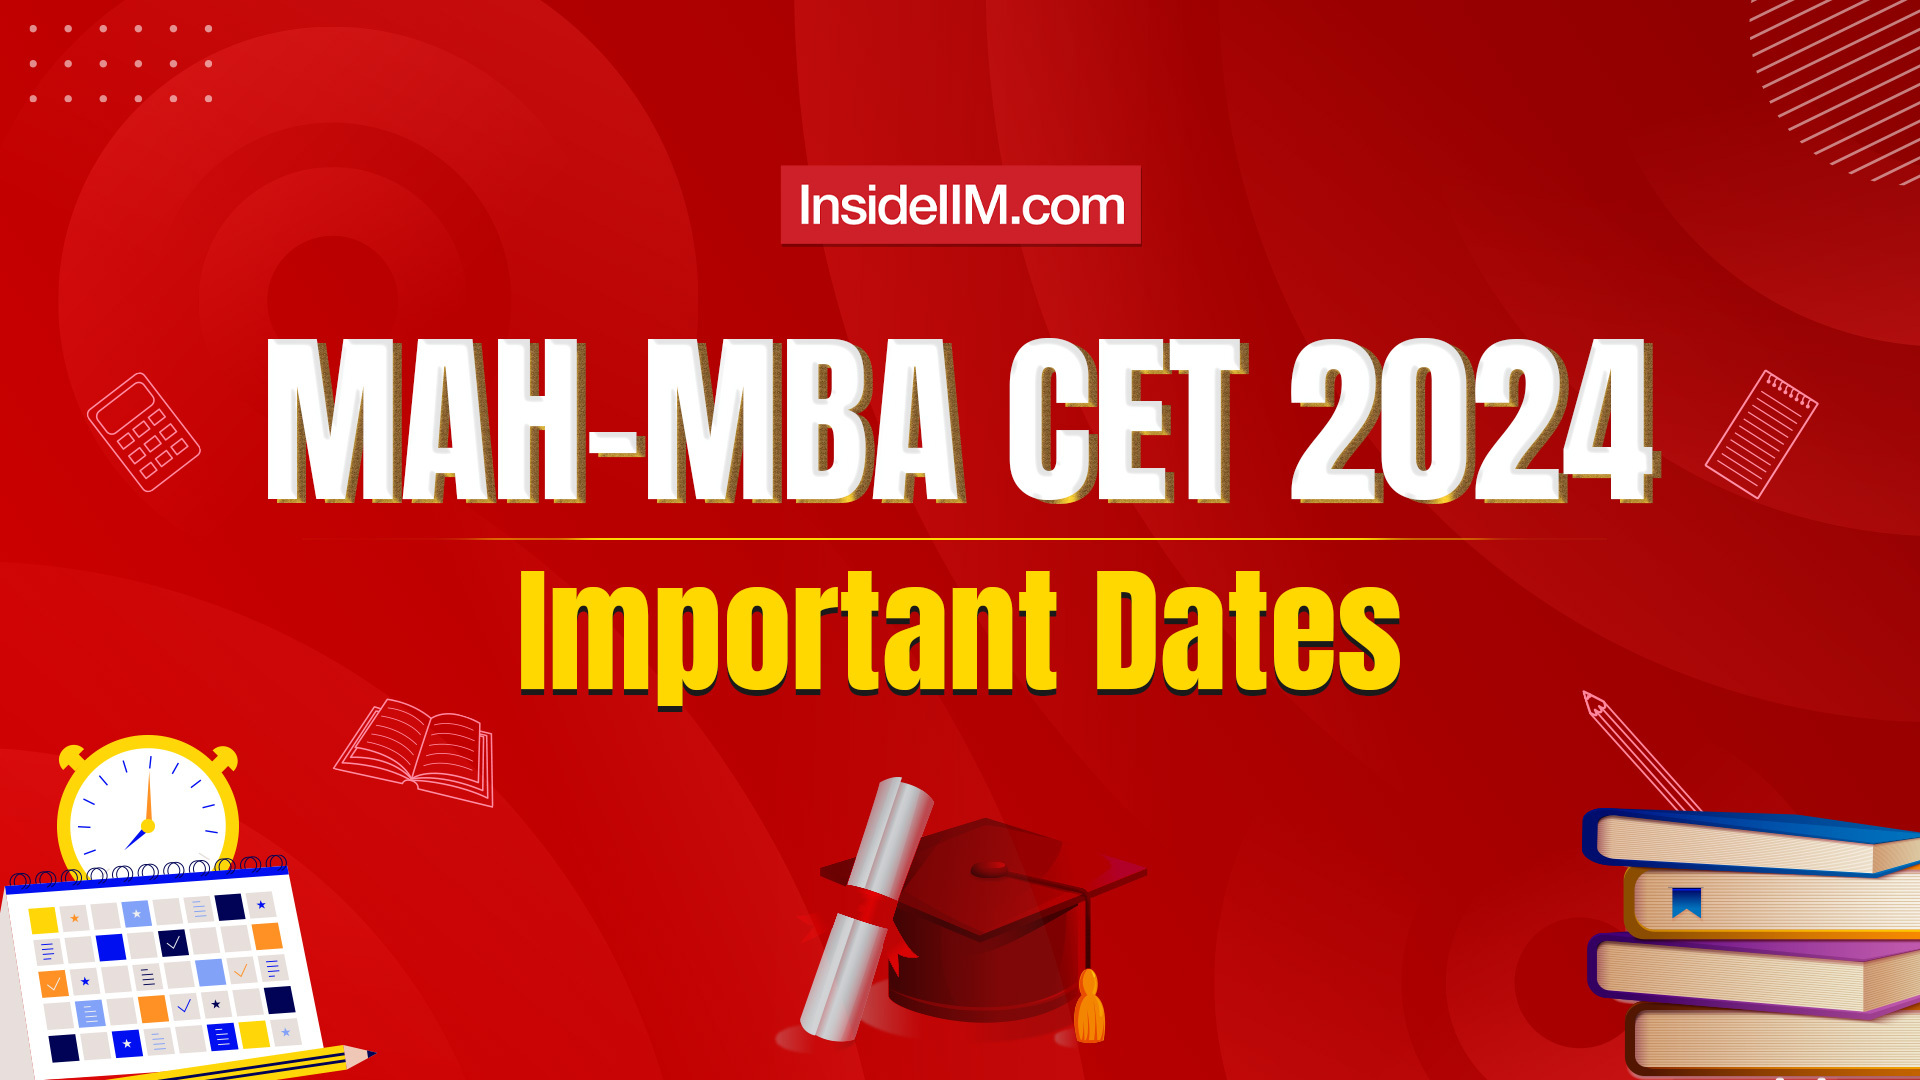 MAHMBA CET 2024 Exam Dates, Pattern, Eligibility & Top Colleges